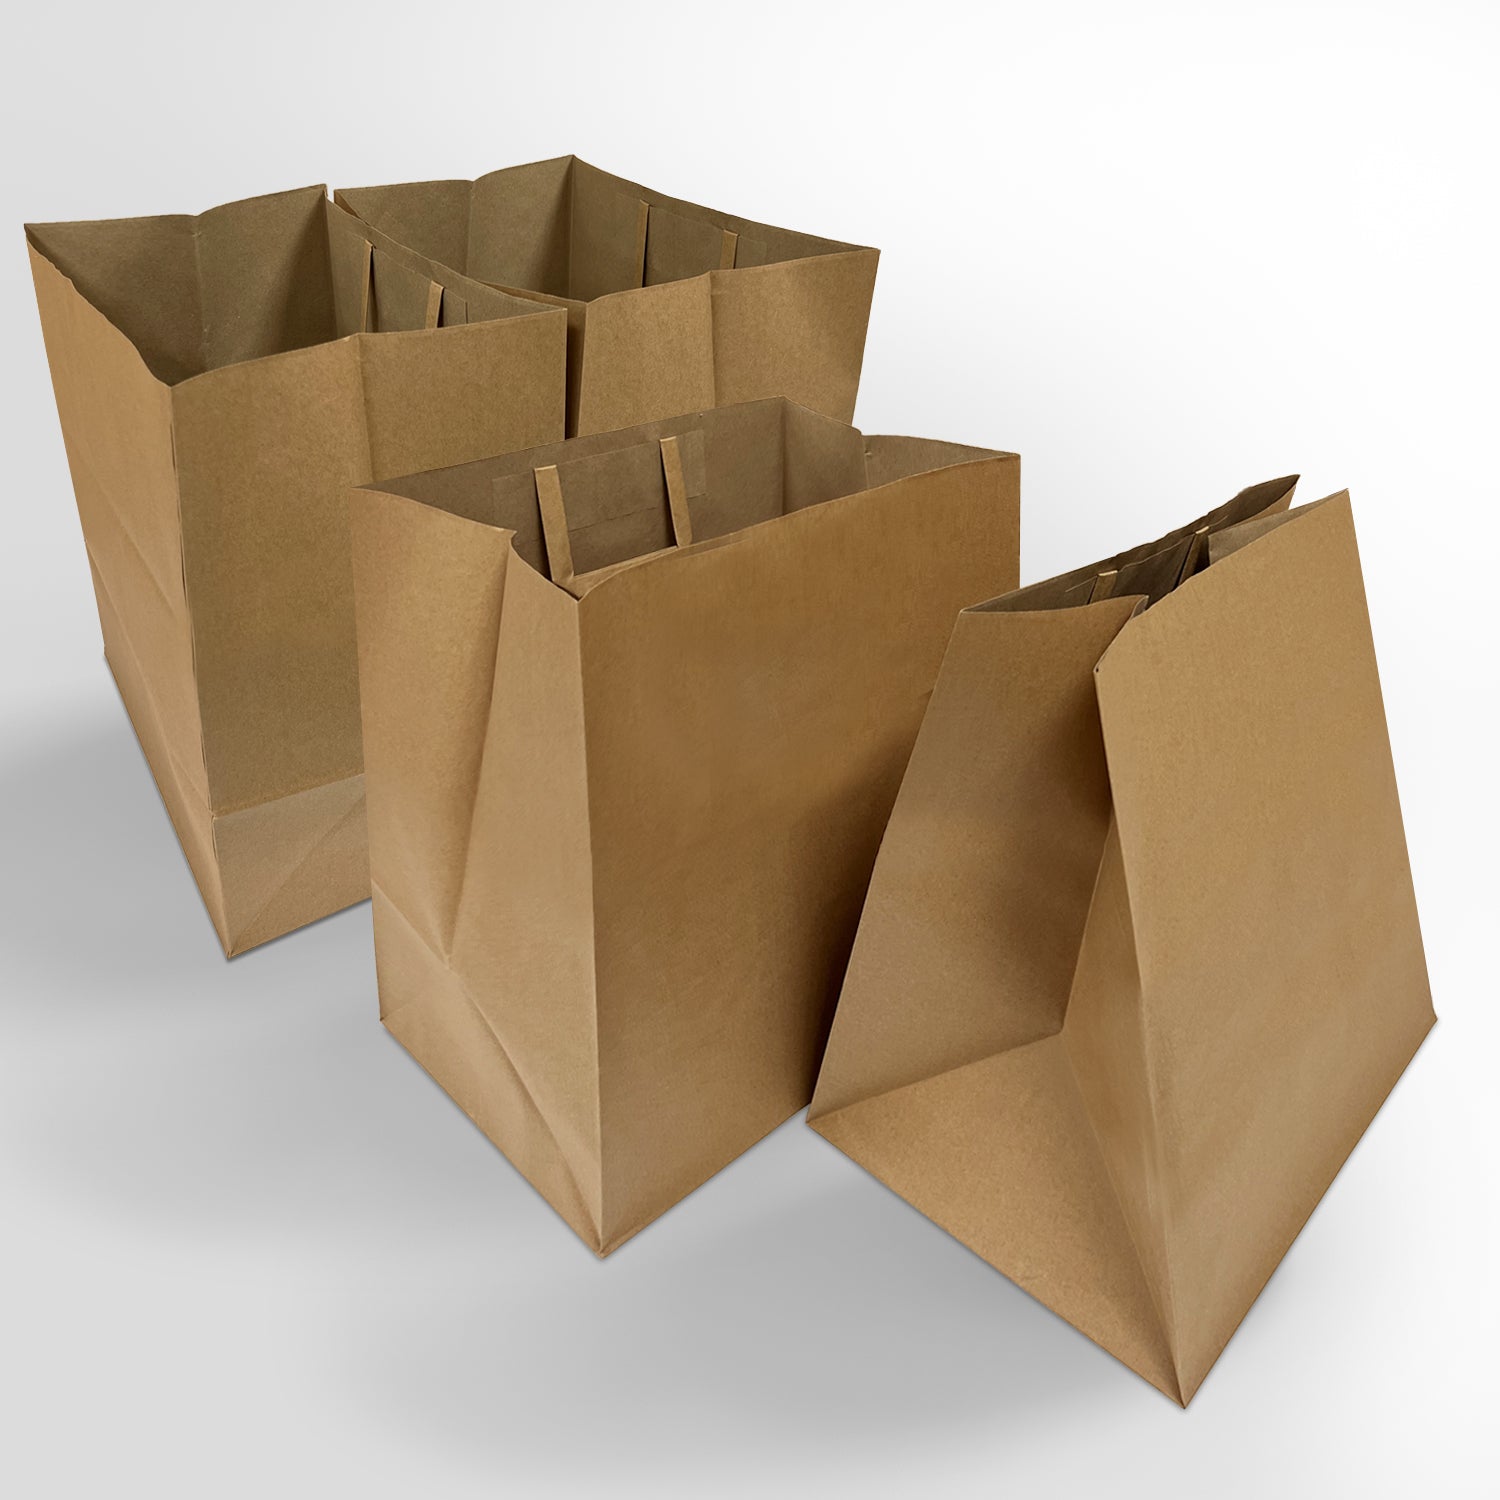 250 Pcs, Super Royal, 14x10x15.75 inches, Kraft Paper Bags, with Flat Handle